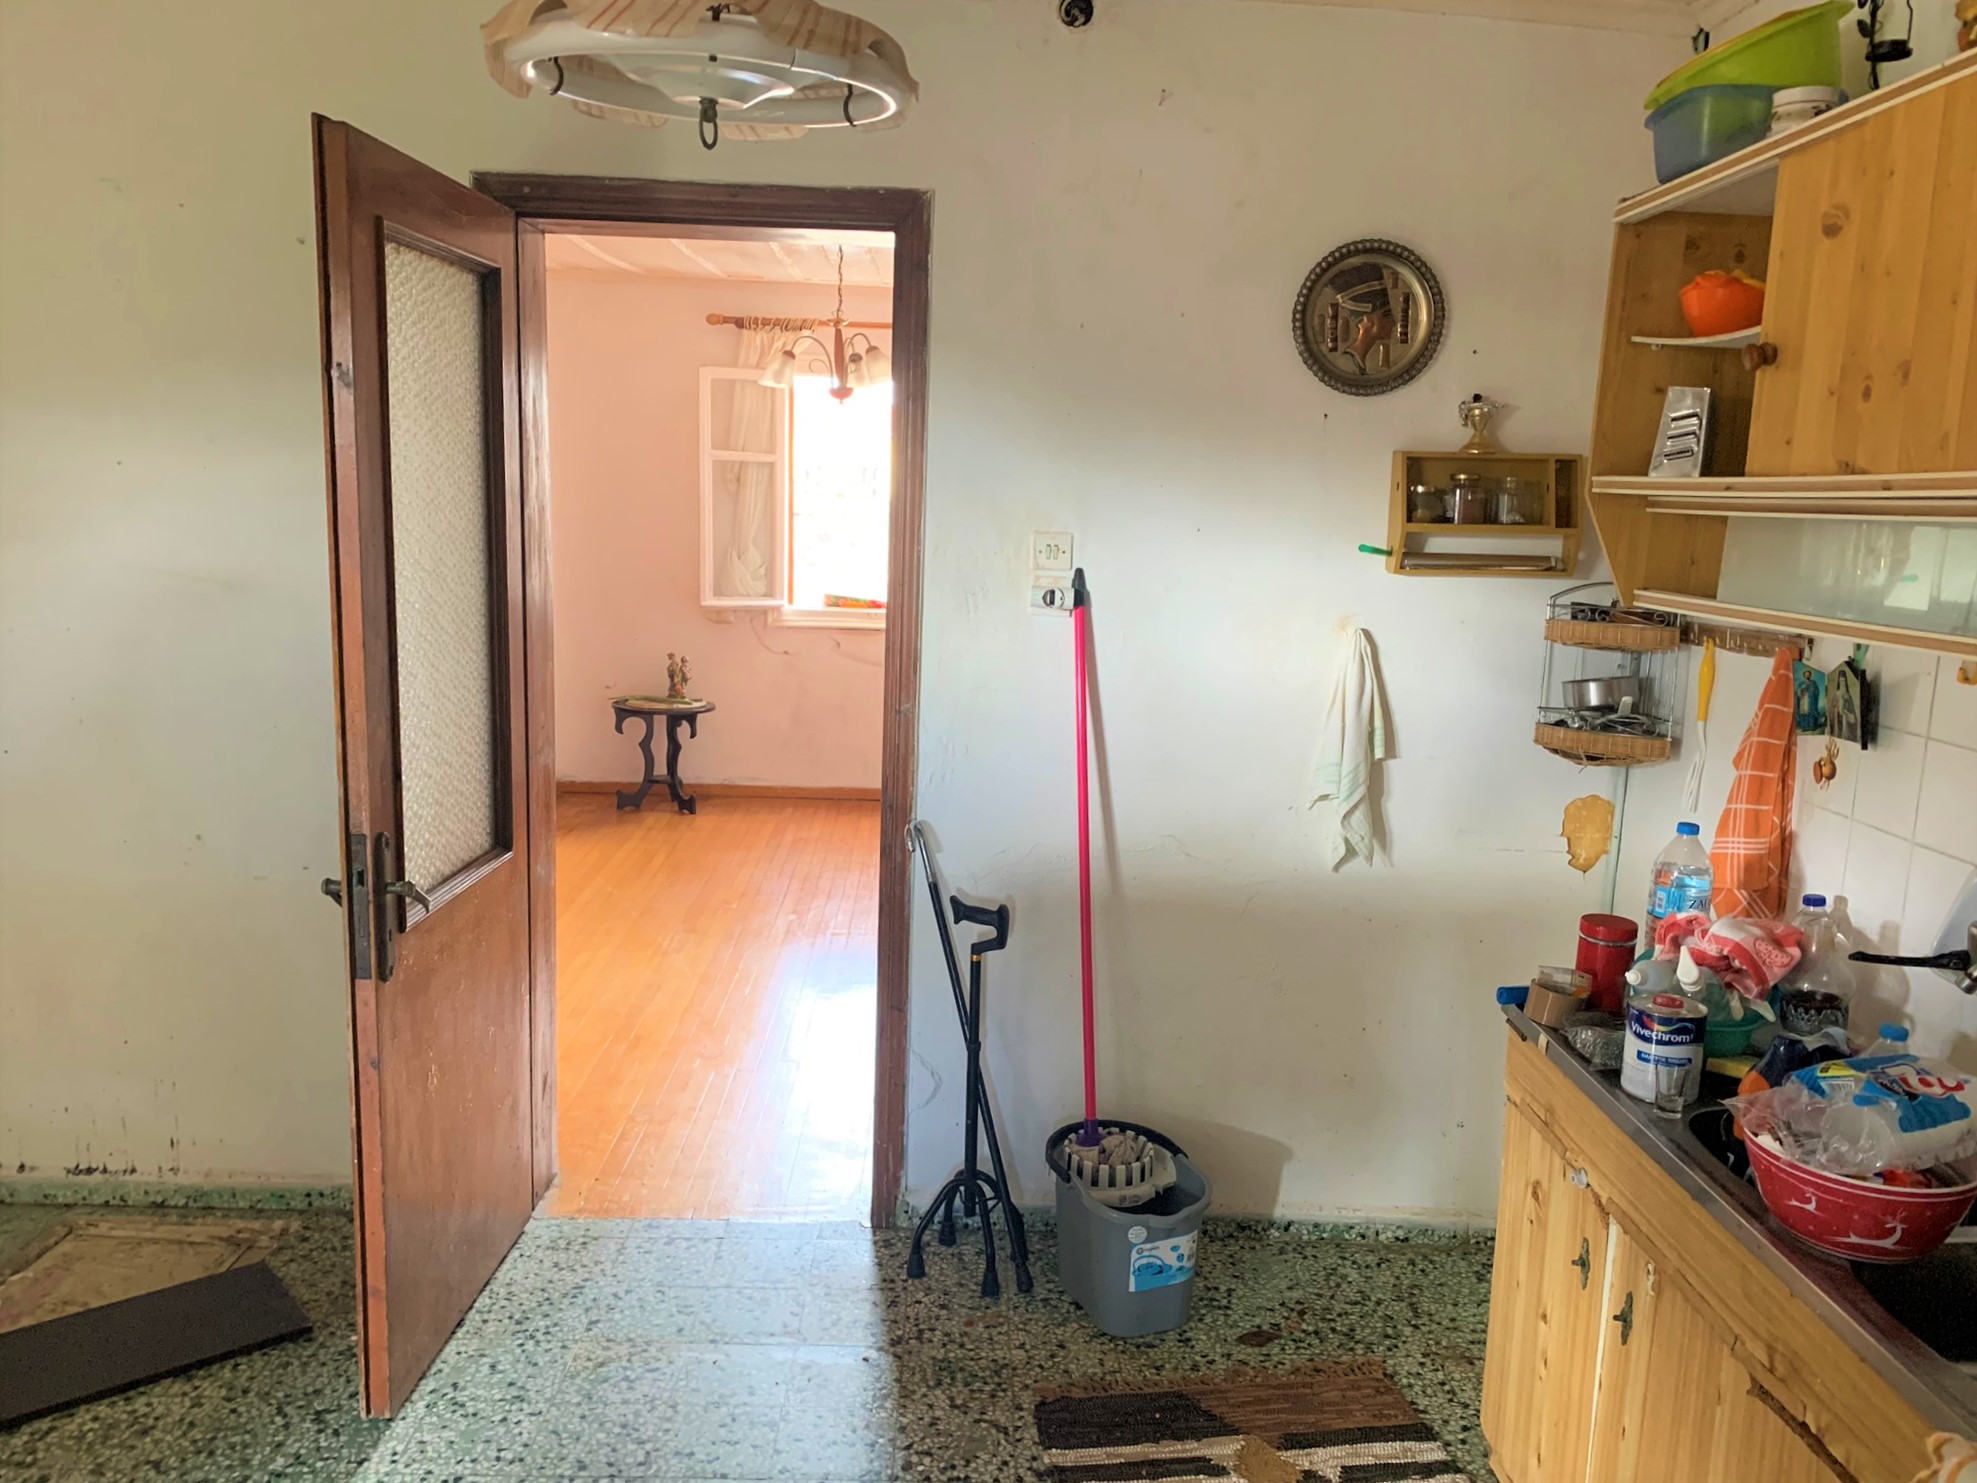 Kitchen of house for sale on Ithaca Greece, Vathi